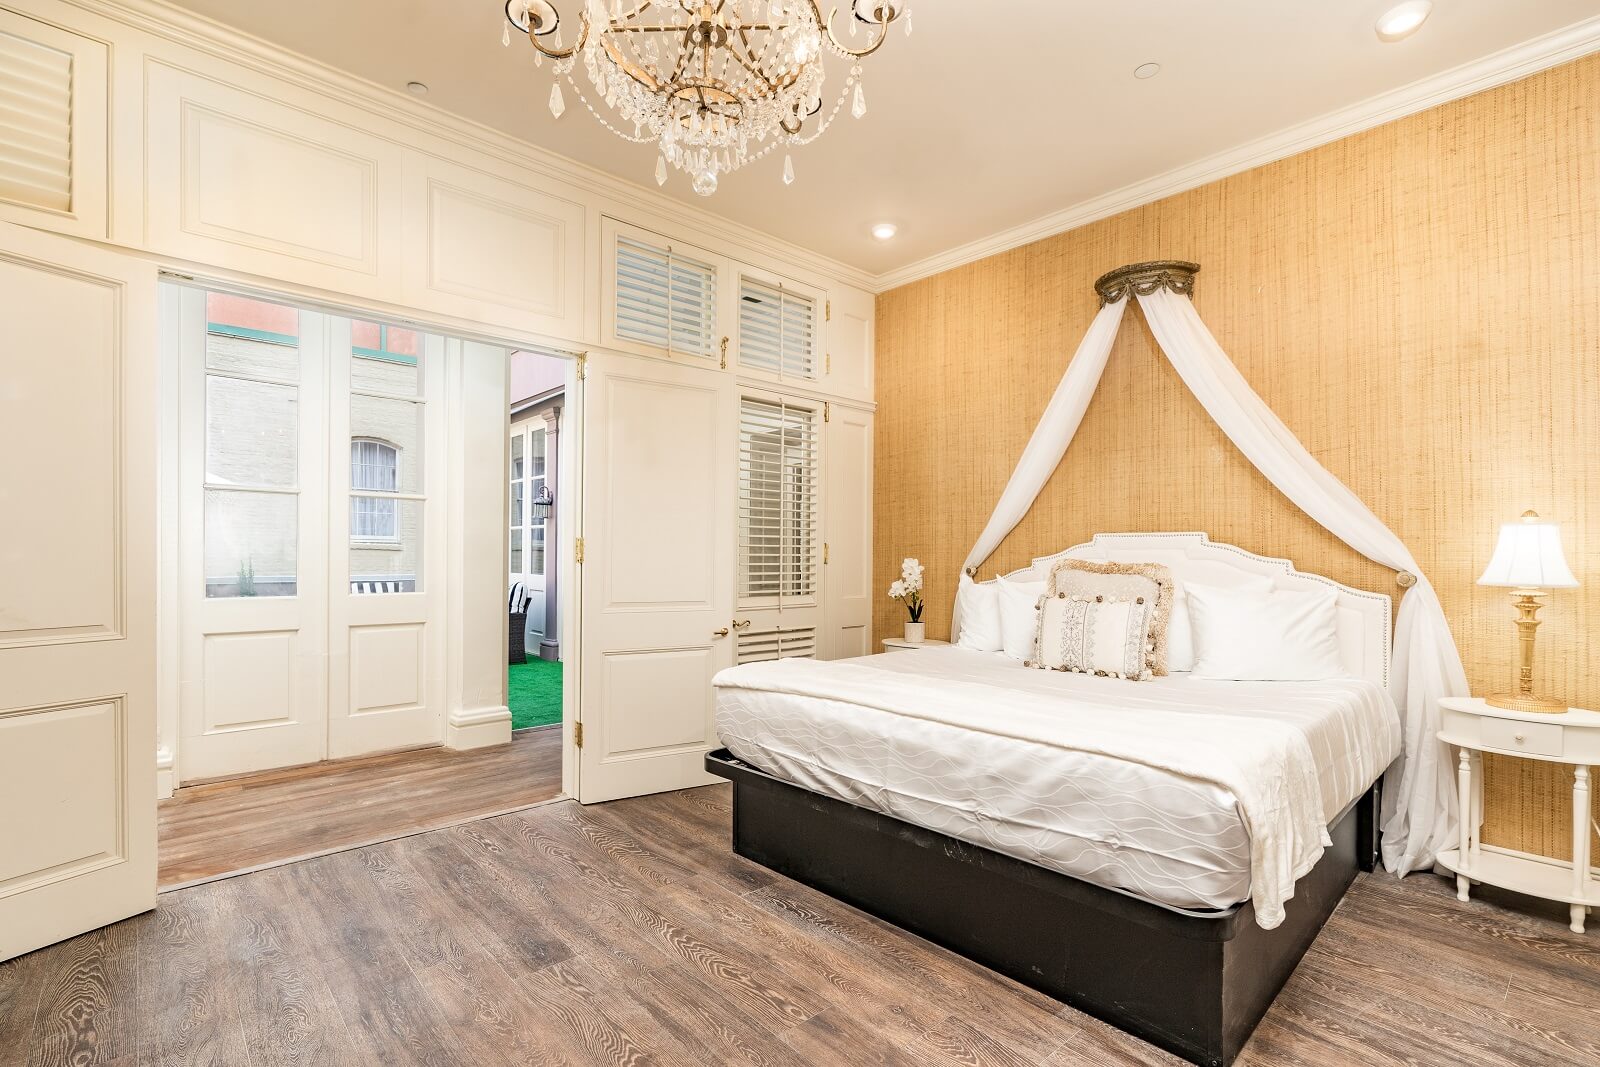 The Alexandre Unit 404 bedroom, a New Orleans luxury rental.